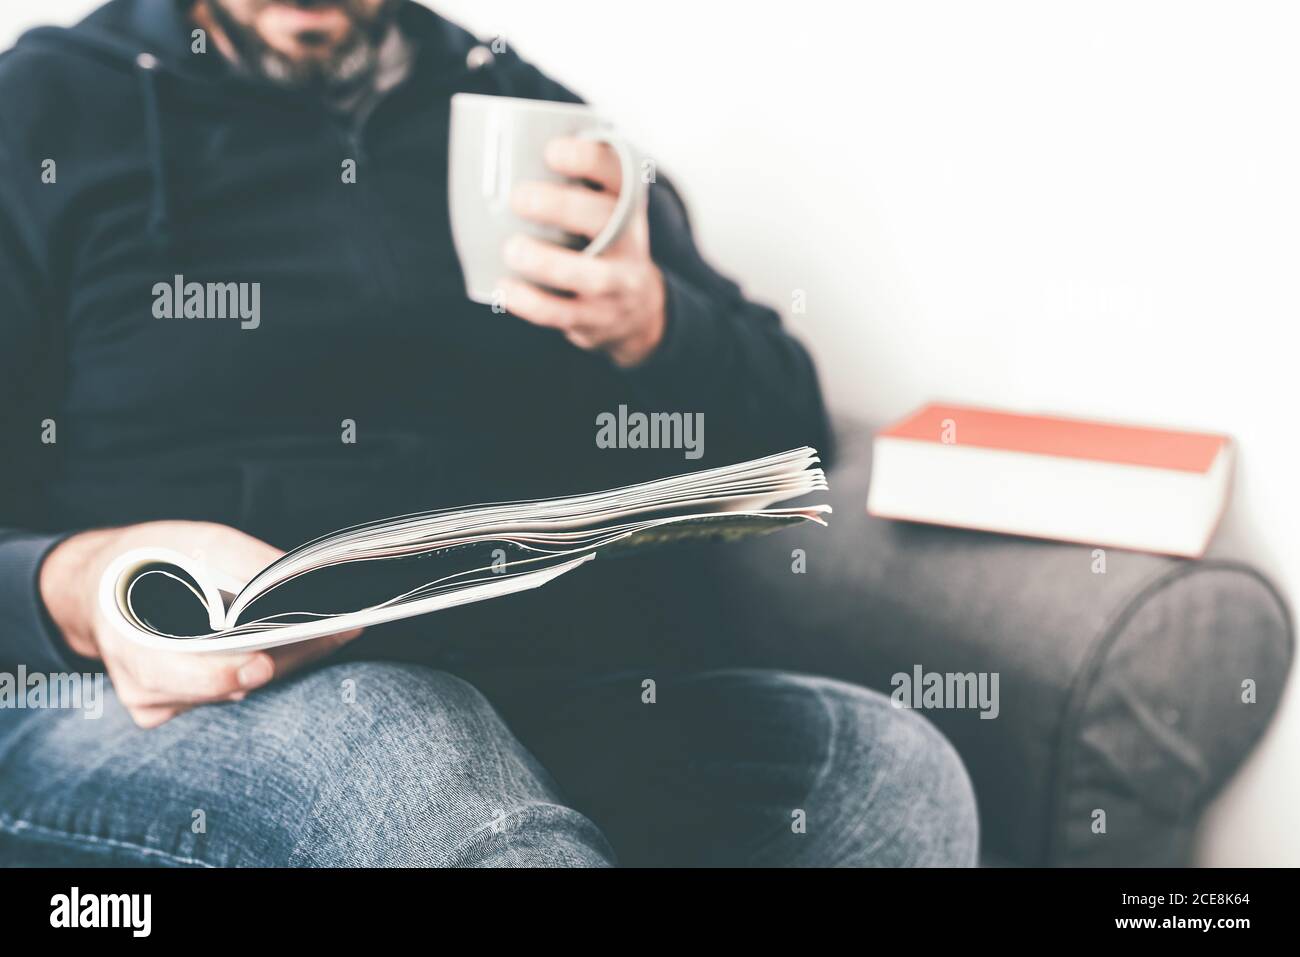 close-up of caucasian man reading magazine or journal on sofa while holding a cup of coffee Stock Photo